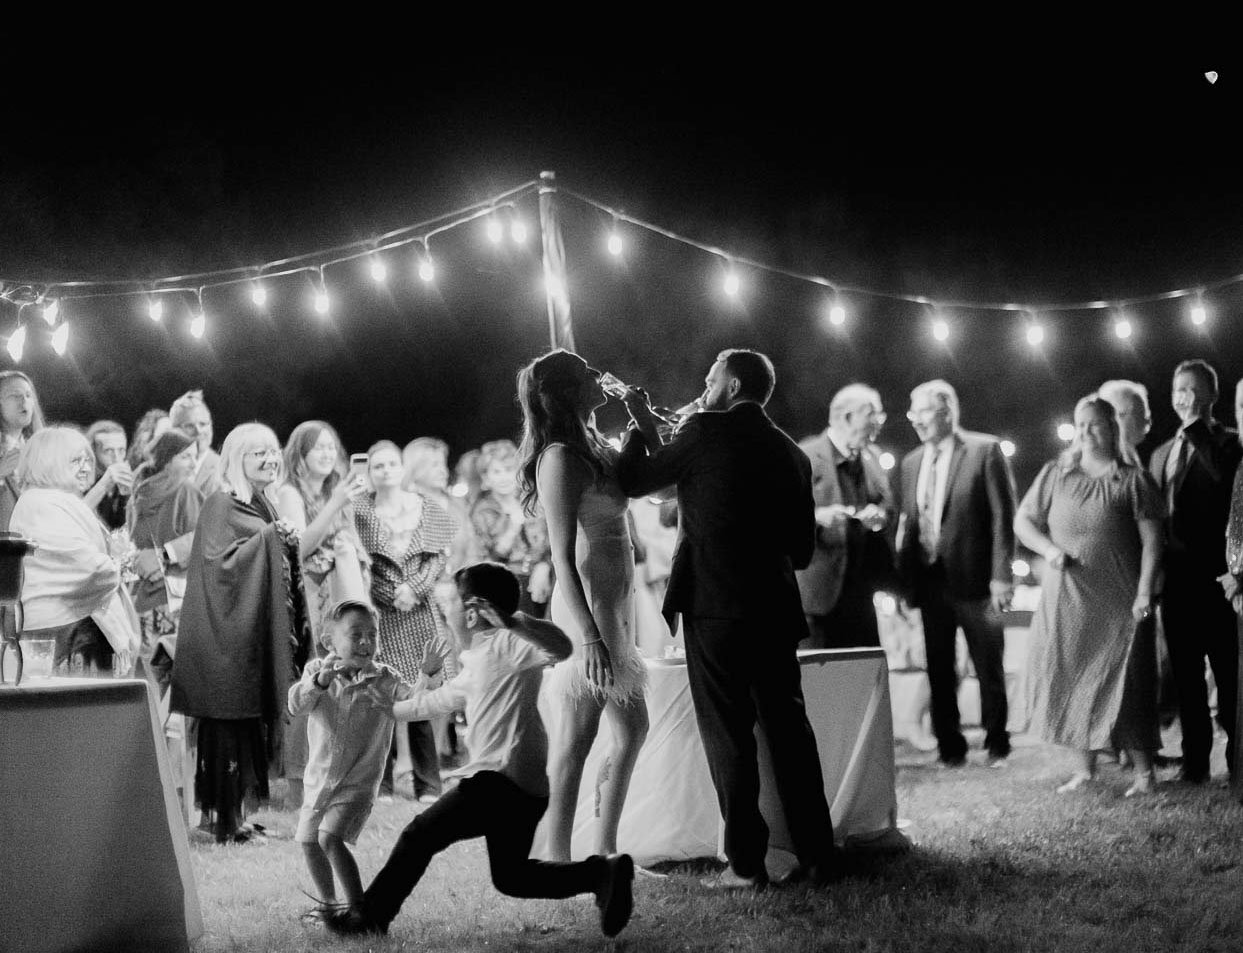 Epitomizing why I love photographing weddings - you never know what might happen - 71 1 The Retreat at Balcones Springs Wedding photographer Philip Thomas L1140048 2